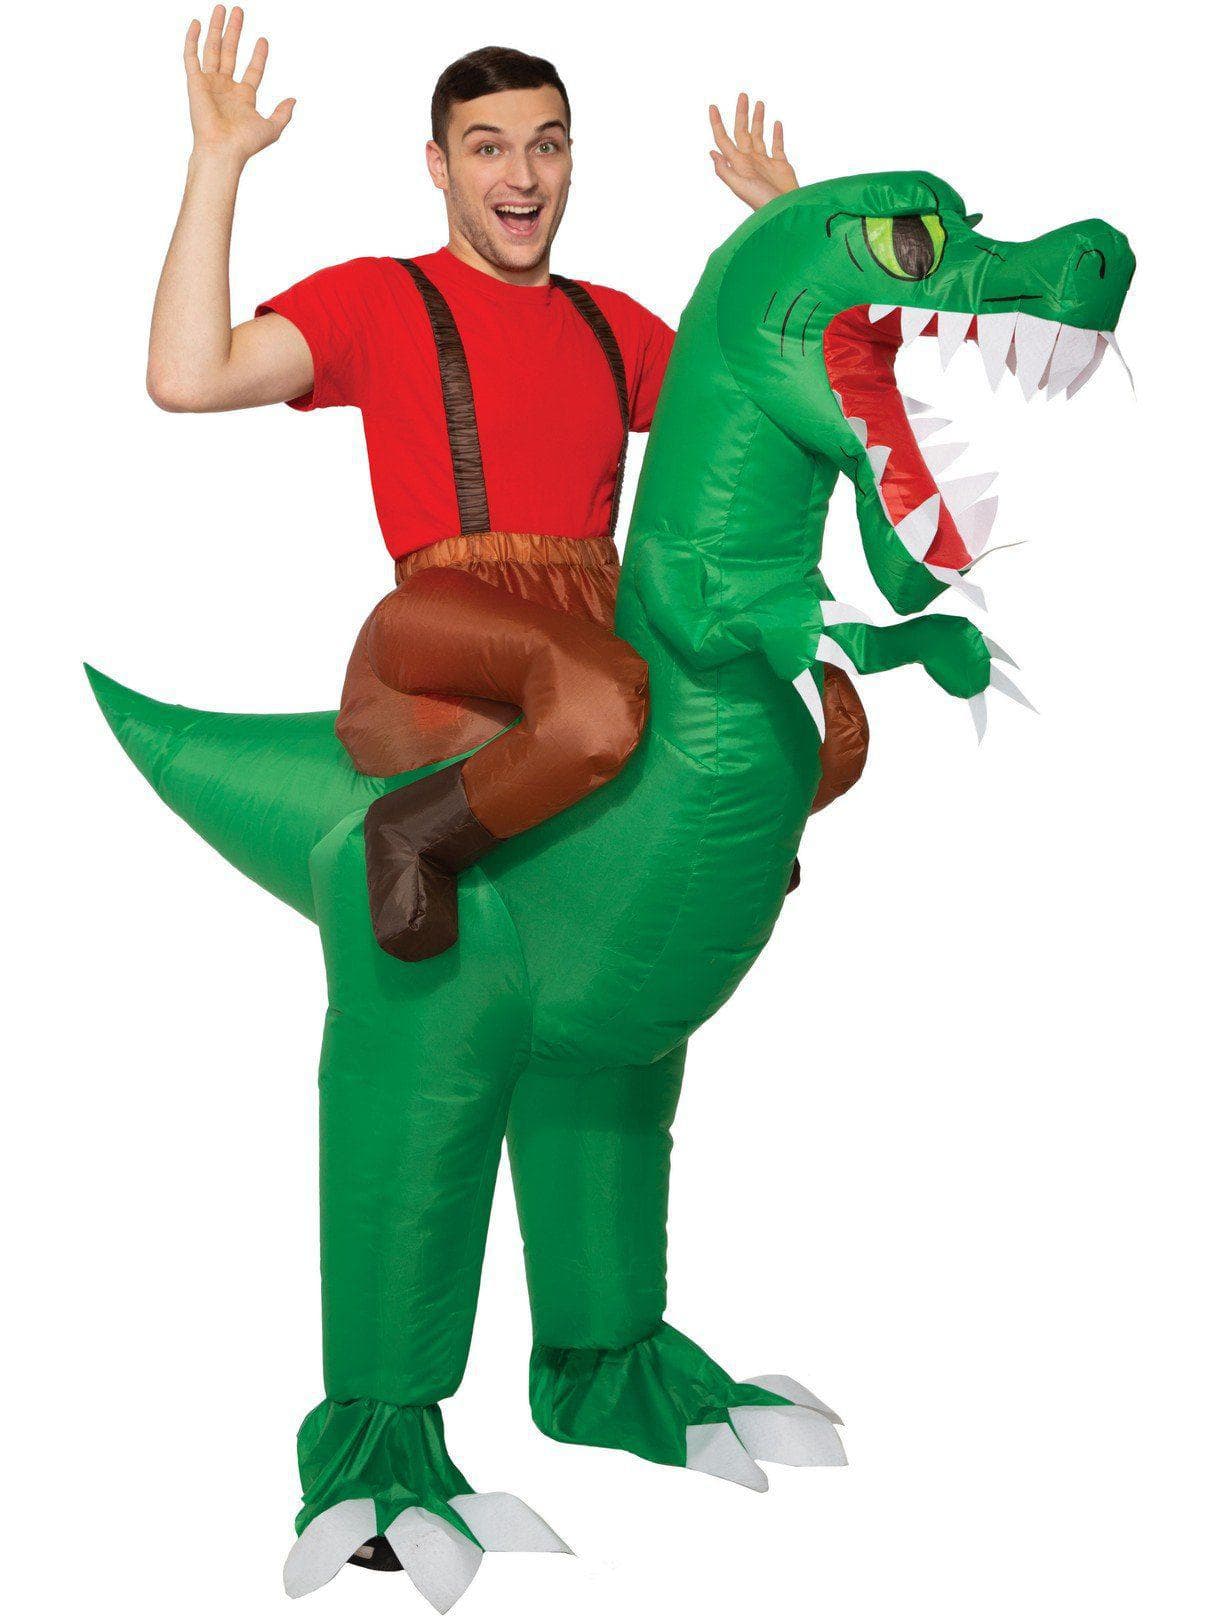 Adult Inflatable Ride-A-Dinosaur Costume - costumes.com